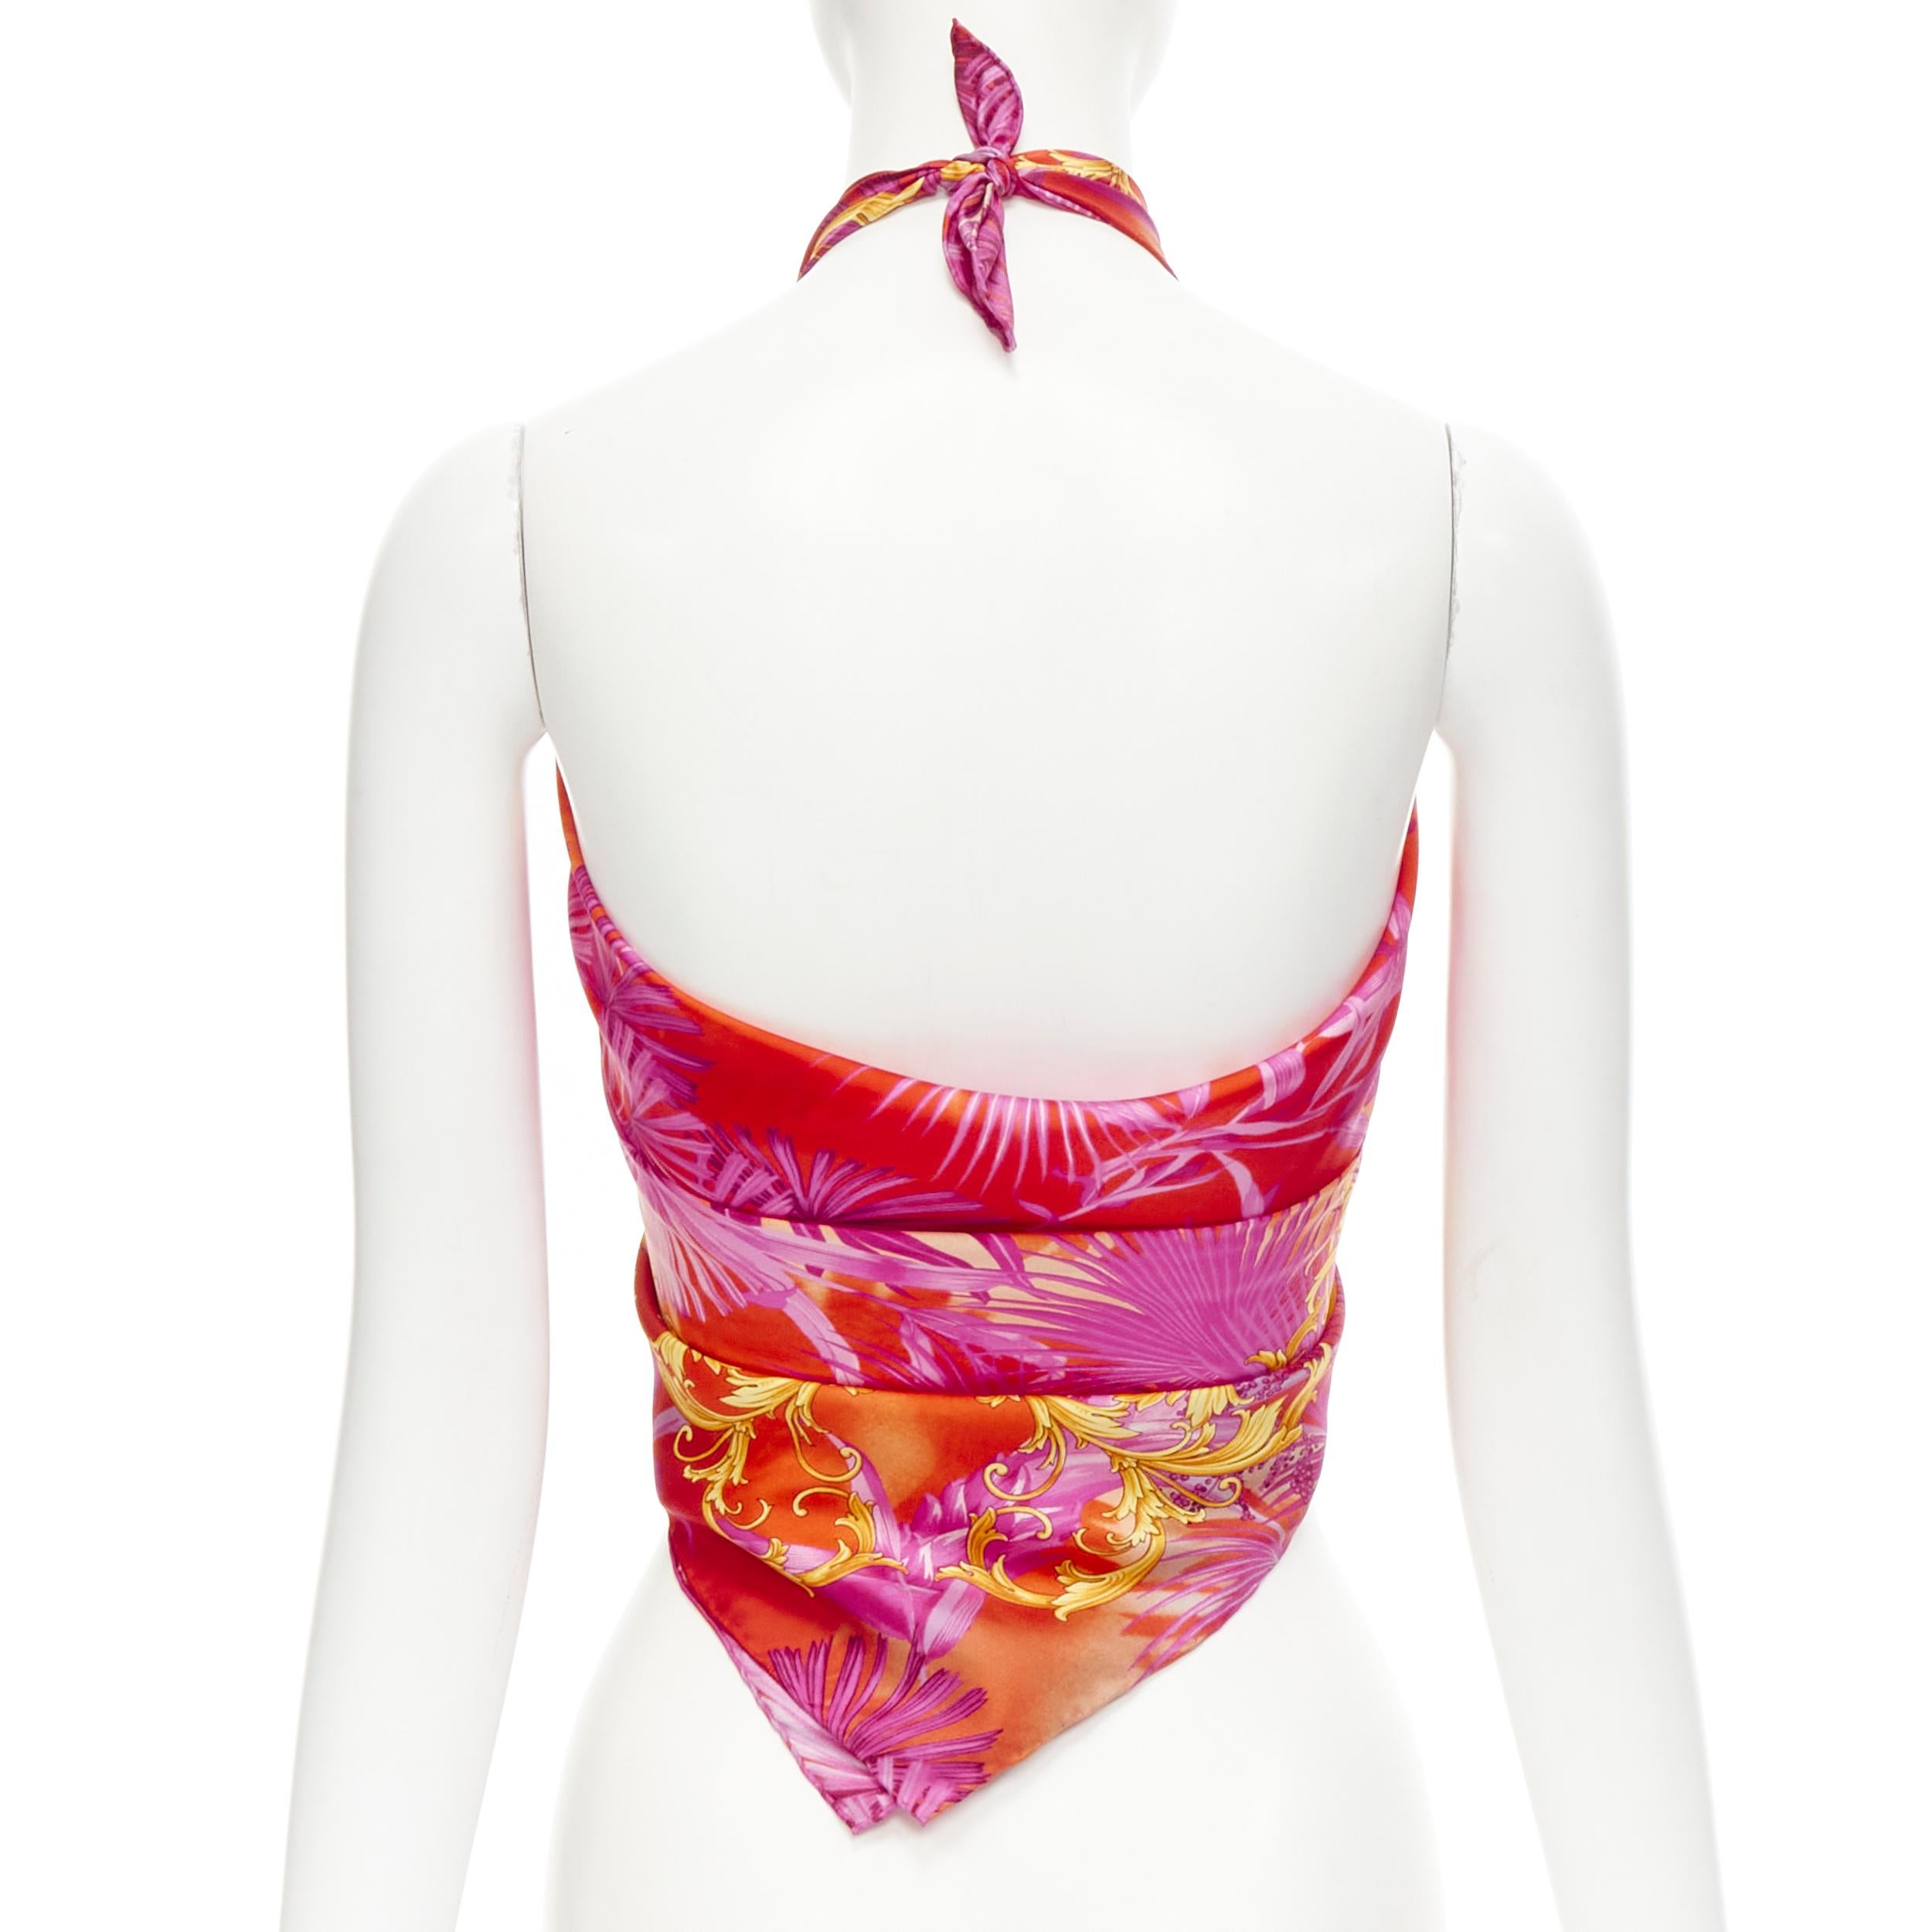 new VERSACE 100% silk 2020 pink Jungle gold Barocco print 90cm square scarf 
Reference: TGAS/C00087 
Brand: Versace 
Designer: Donatella Versace 
Collection: 2020 
Material: Silk 
Color: Pink 
Pattern: Floral 
Extra Detail: 90 x 90cm. Can be worn as